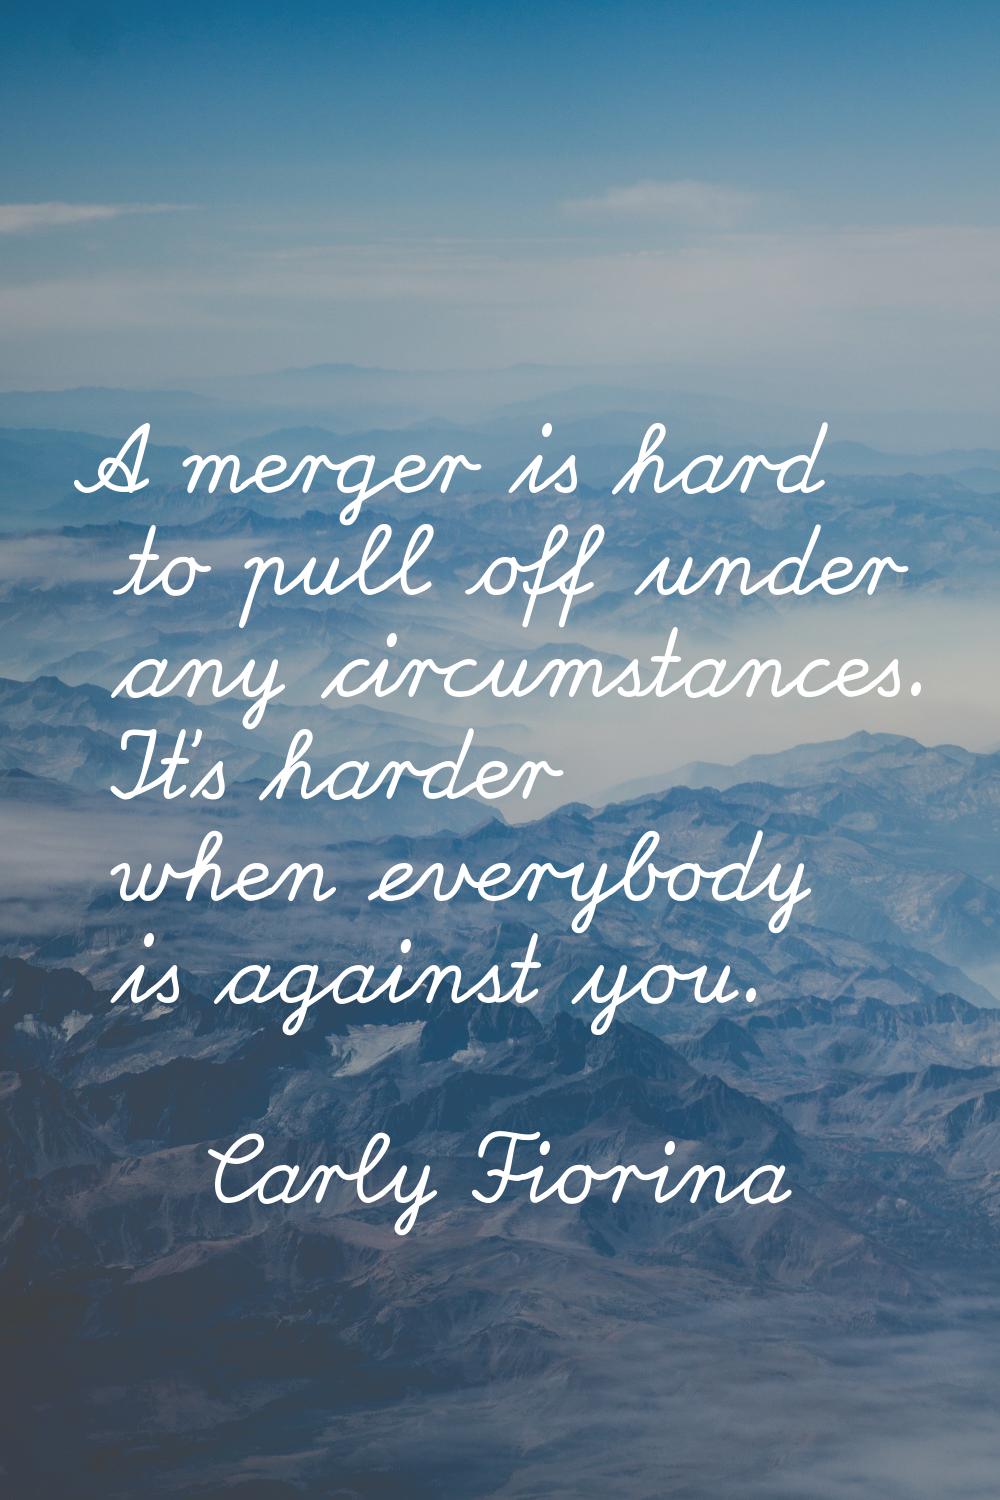 A merger is hard to pull off under any circumstances. It's harder when everybody is against you.